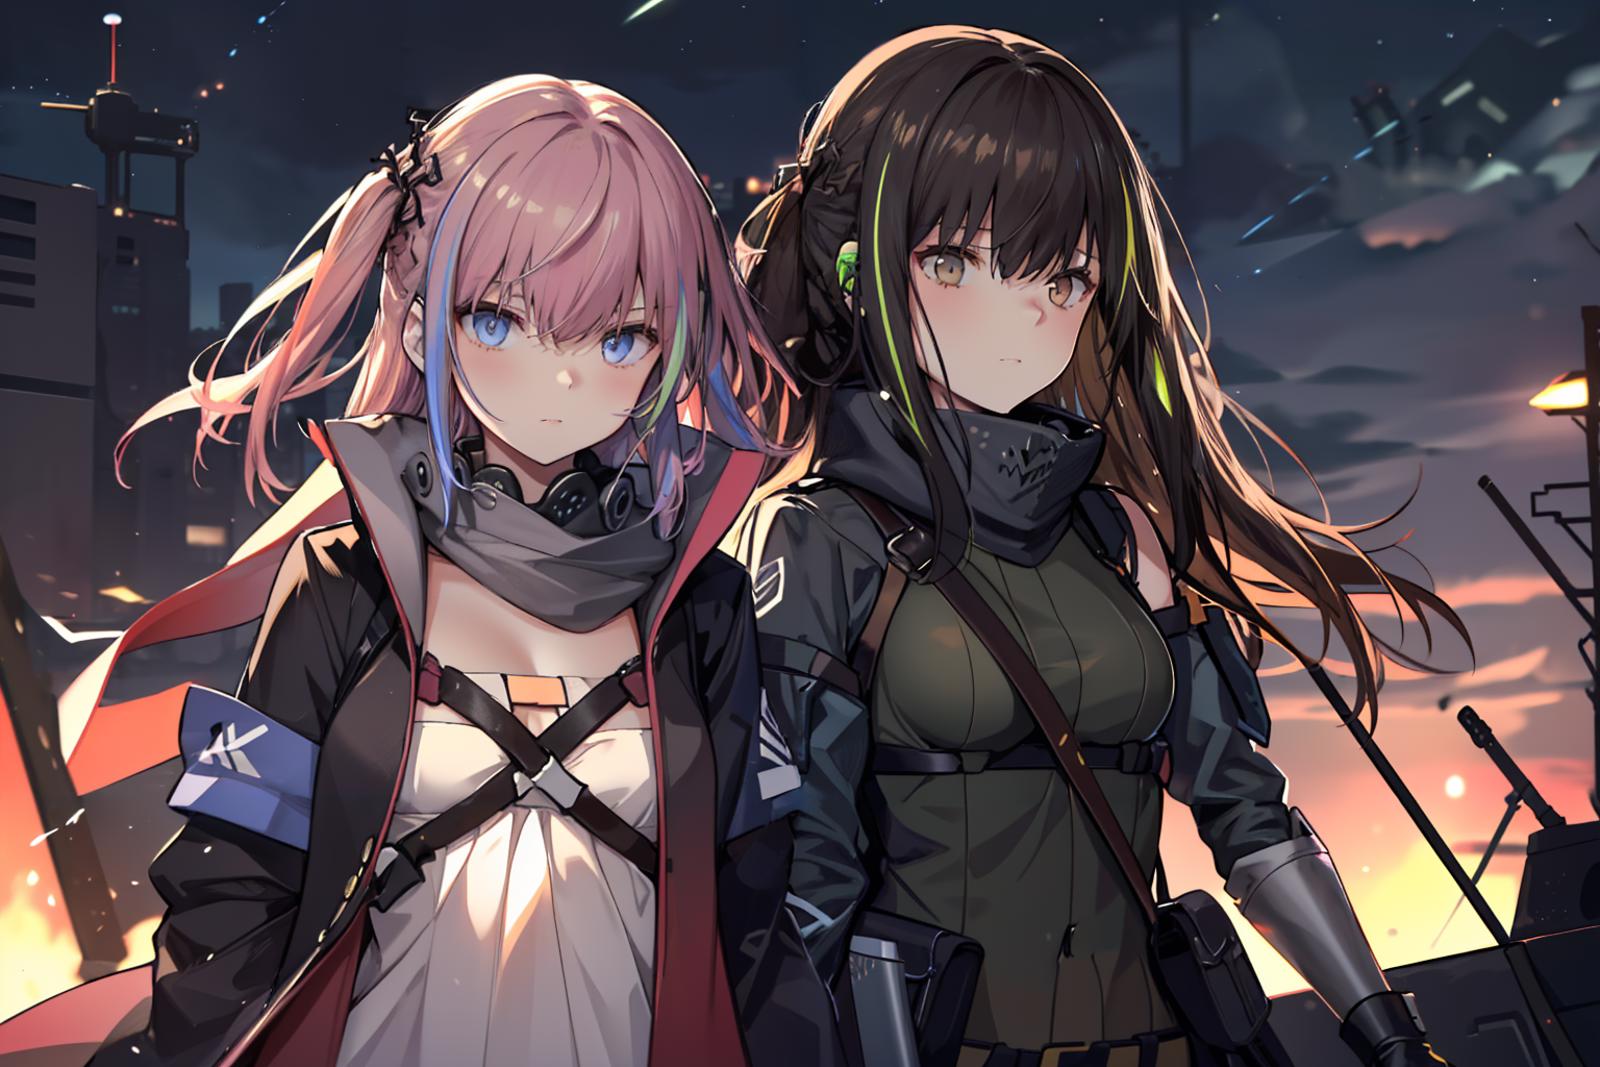 M4a1 | Girls' Frontline image by l1408